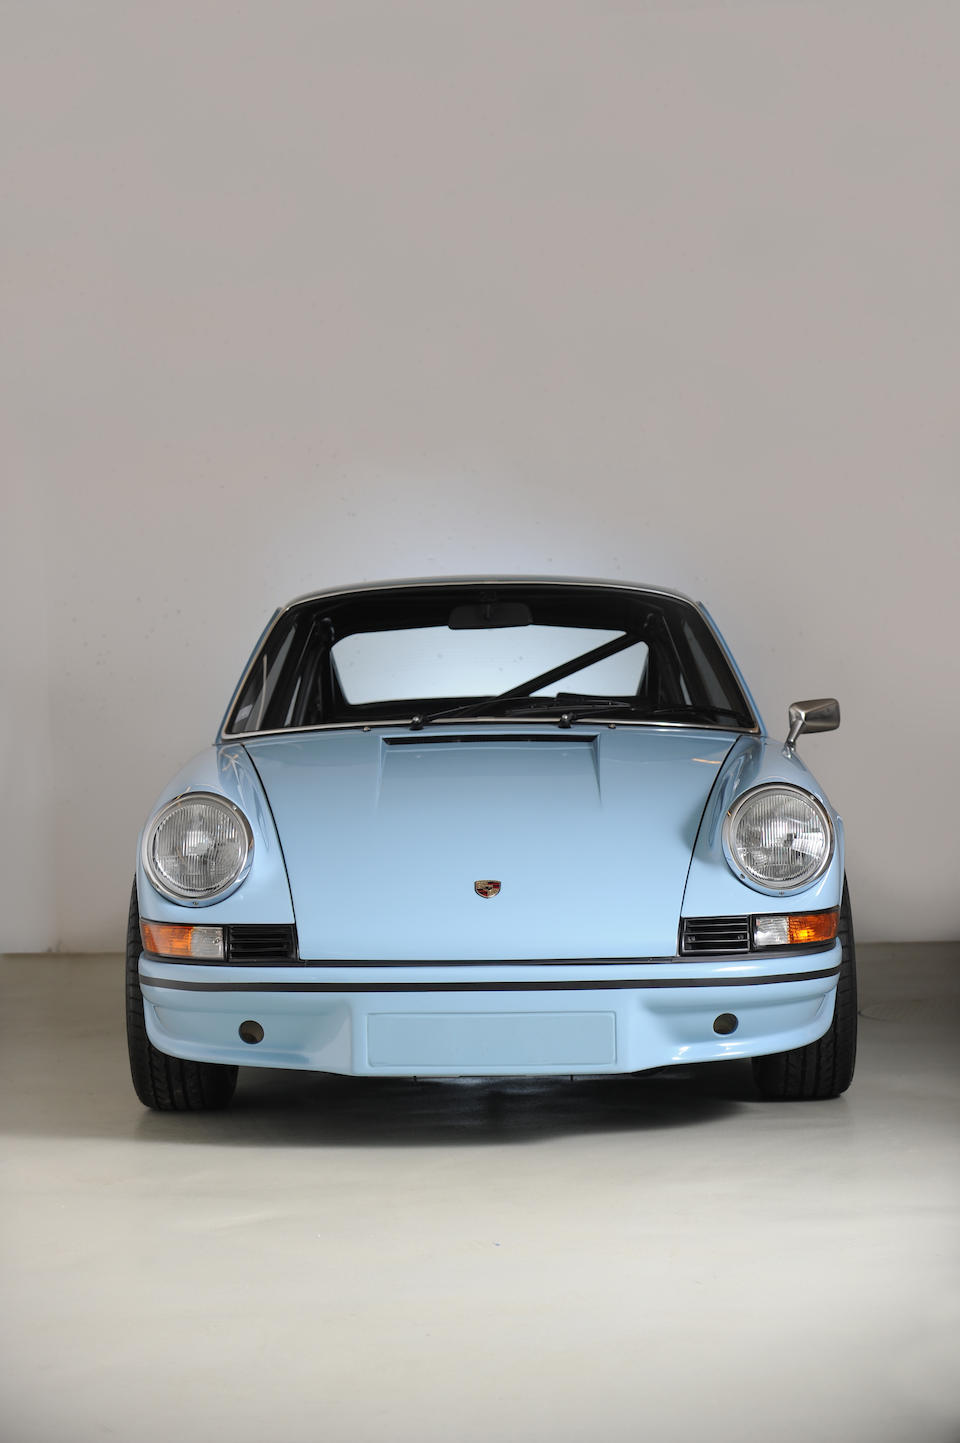 Delivered new to Belgium,1973 Porsche 911 Carrera RS 2.7-Litre Coupe  Chassis no. 9113601059 Engine no. 6631030 (see text)